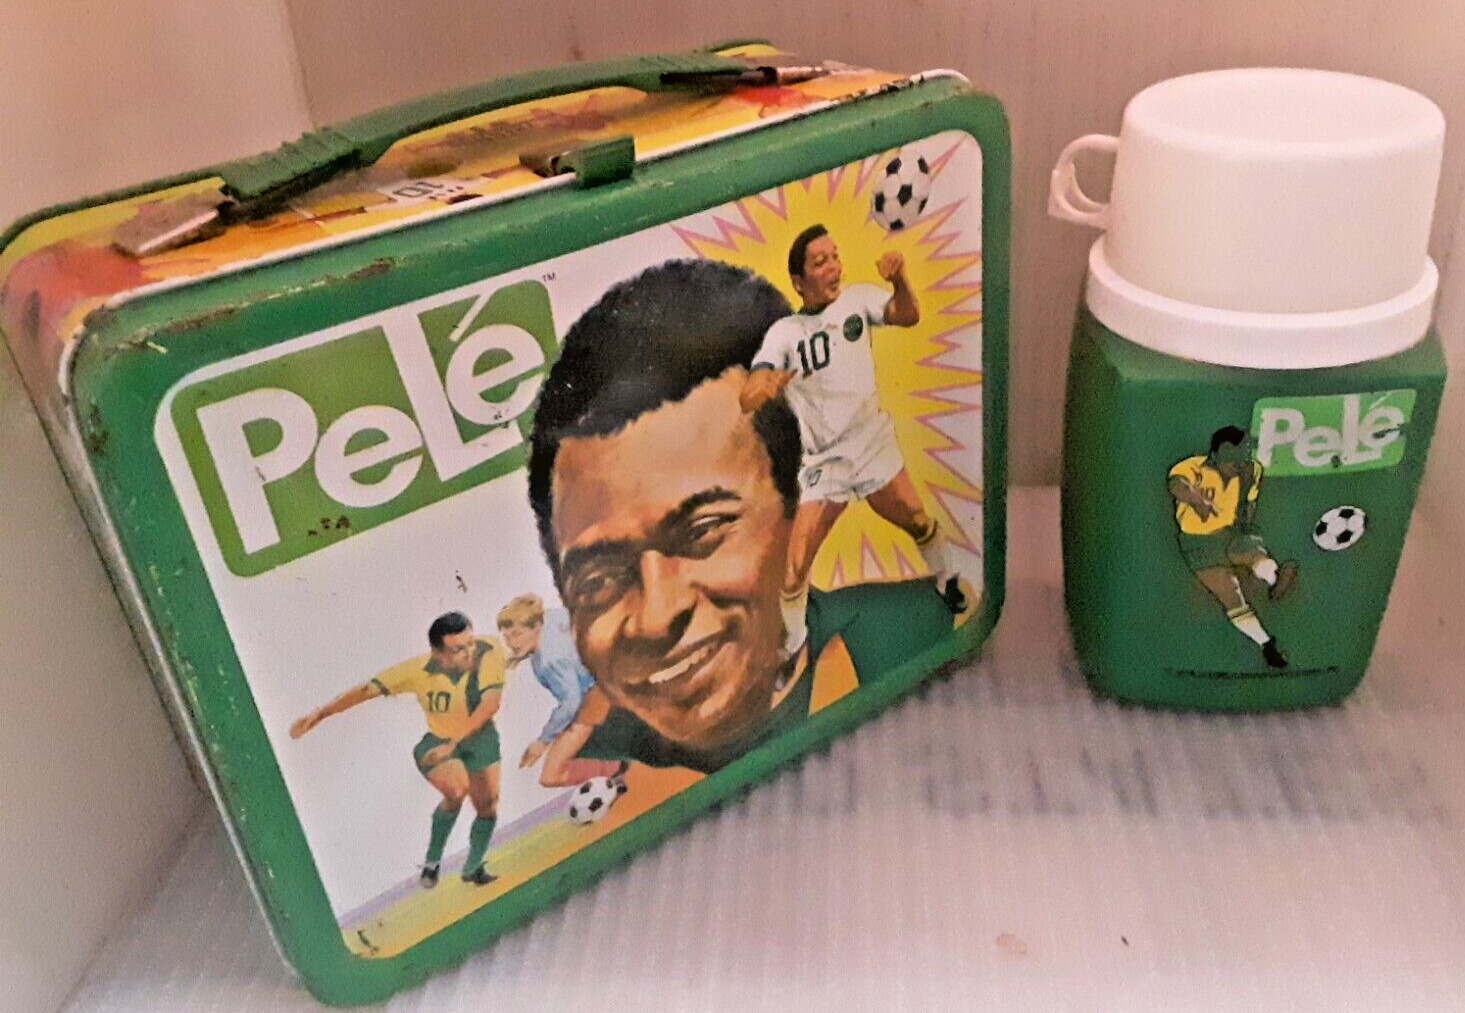 ~VERY RARE 1975 Pele Soccer Sport's Star Metal Lunch Box & Thermos Lunchbox Set